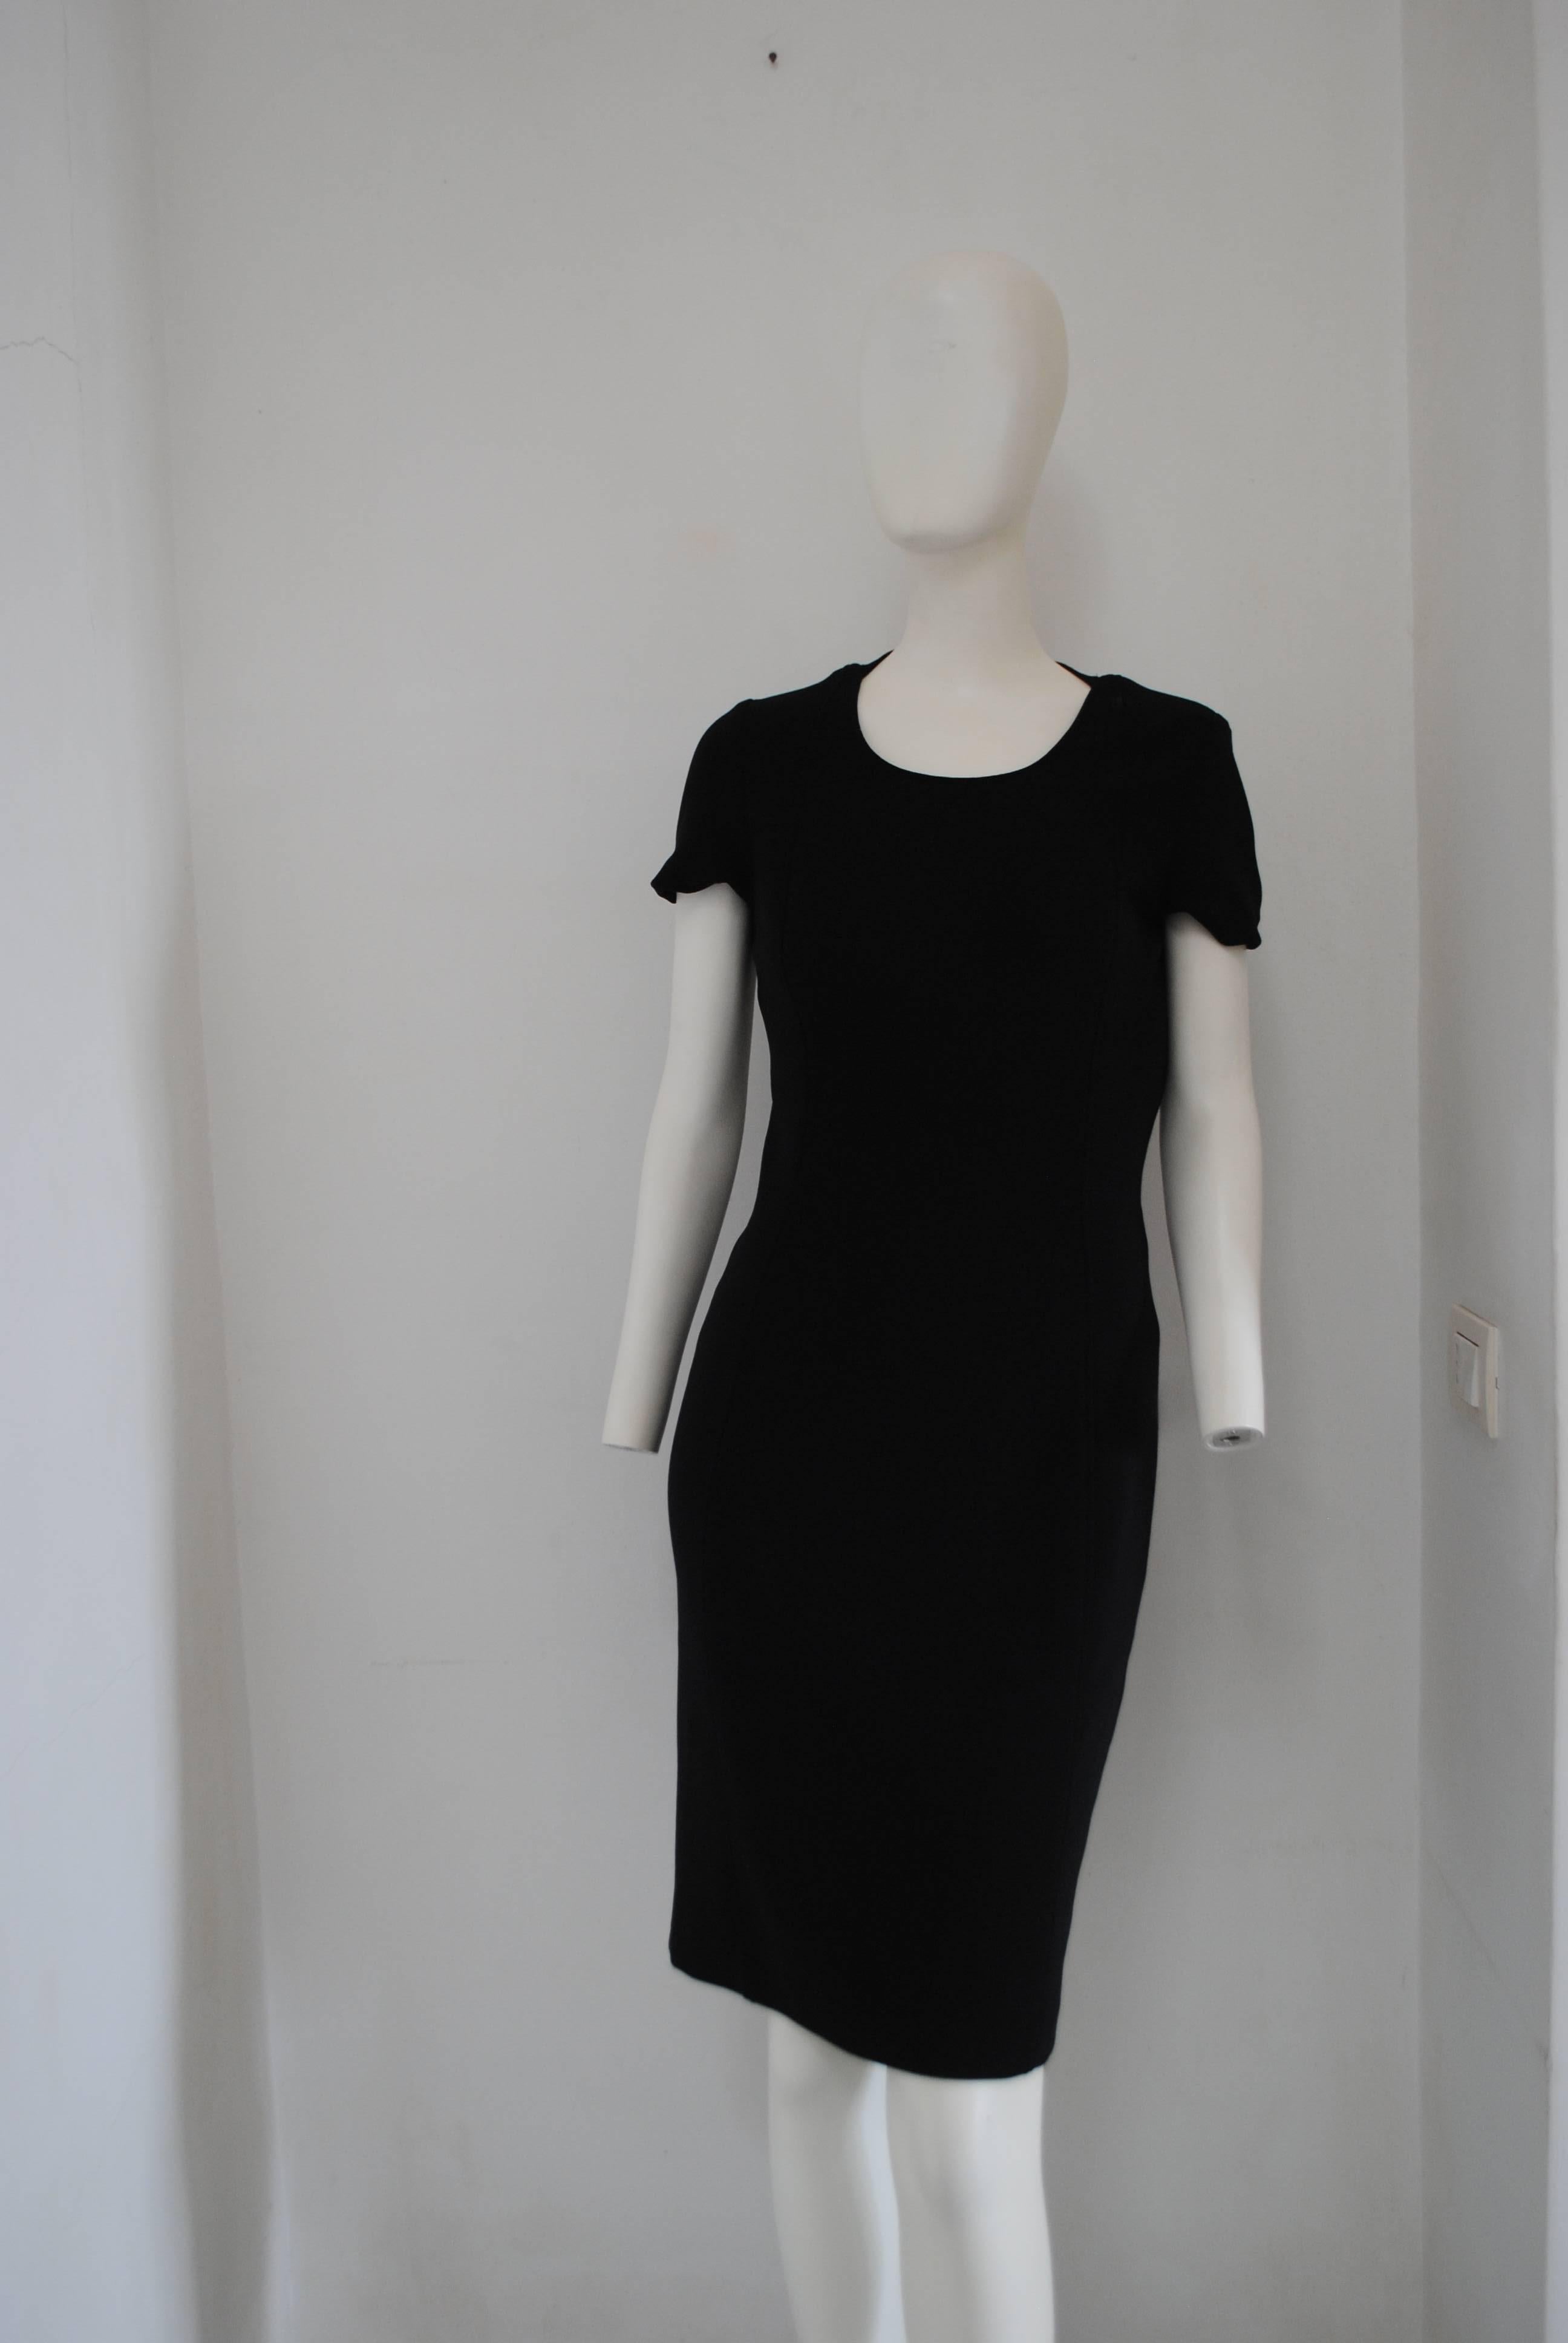 Gianfranco Ferré Black Dress

Totally made in italy in size S 

